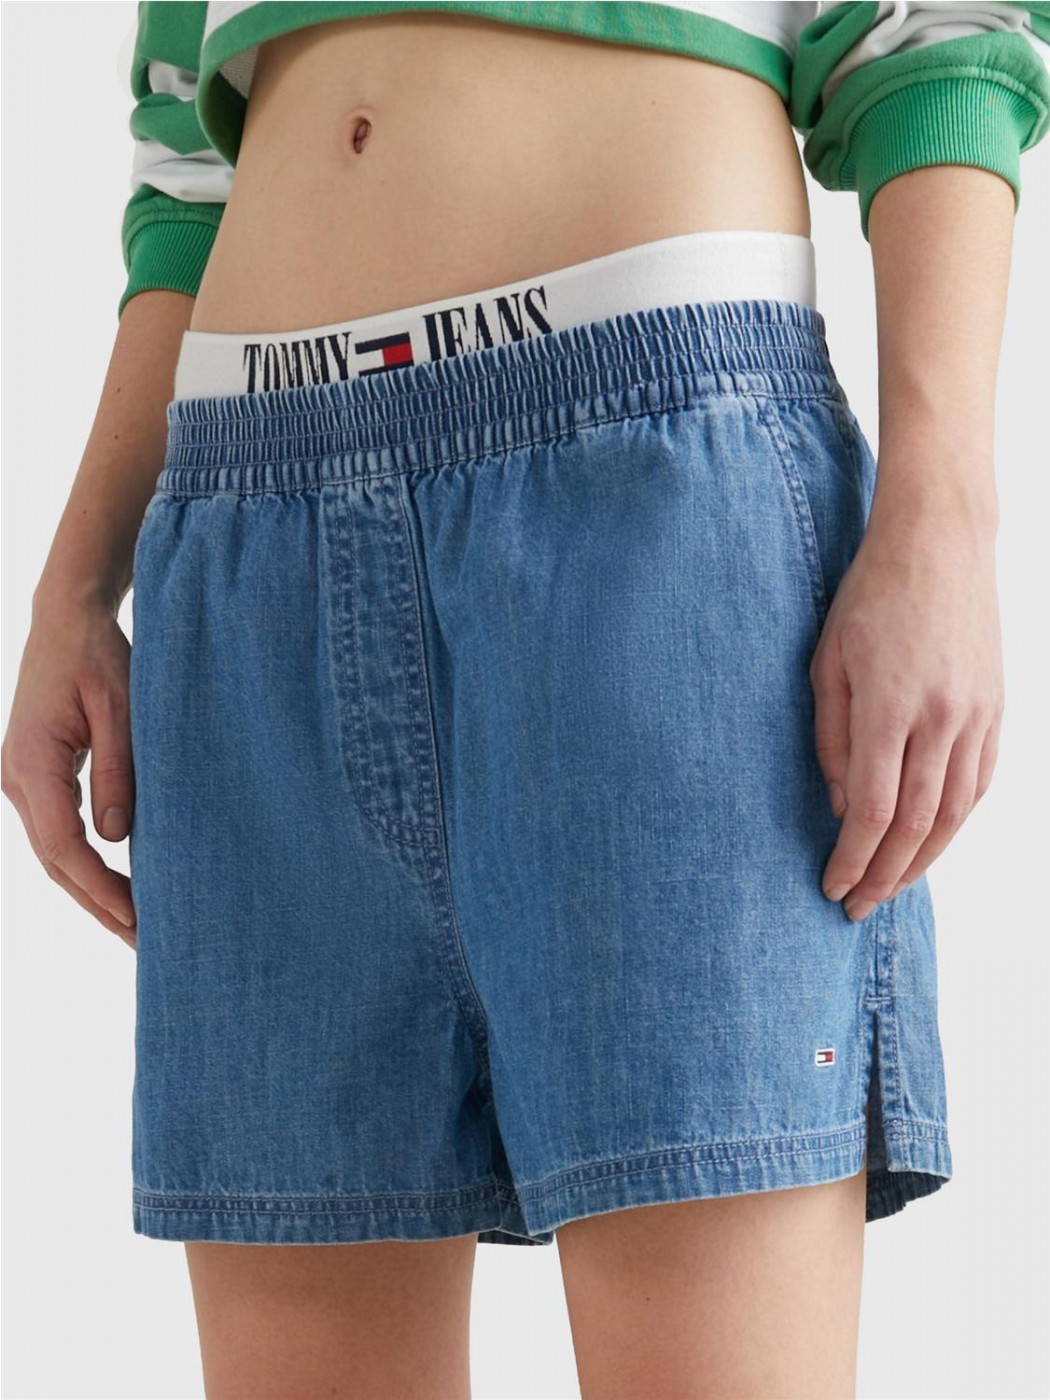 SHORT TOMMY JEANS MUJER...